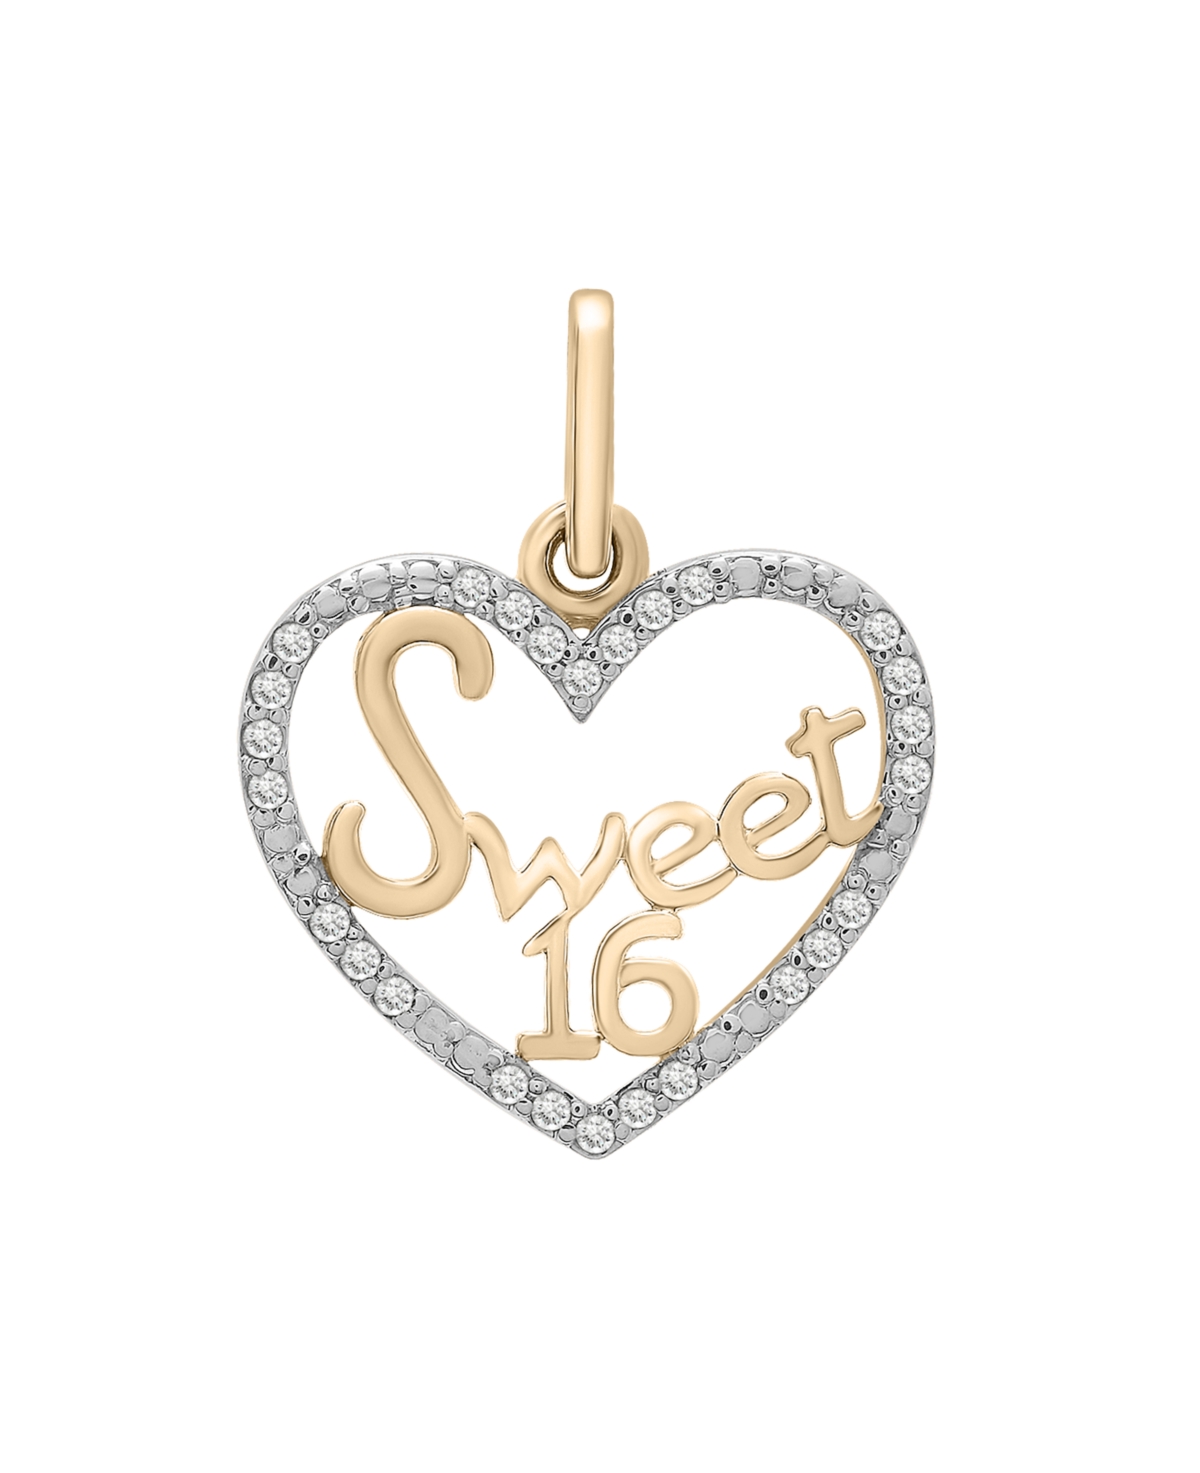 Diamond Sweet 16 Heart Charm Pendant (1/20 ct. t.w.) in 10k Gold, Created for Macy's - Yellow Gold